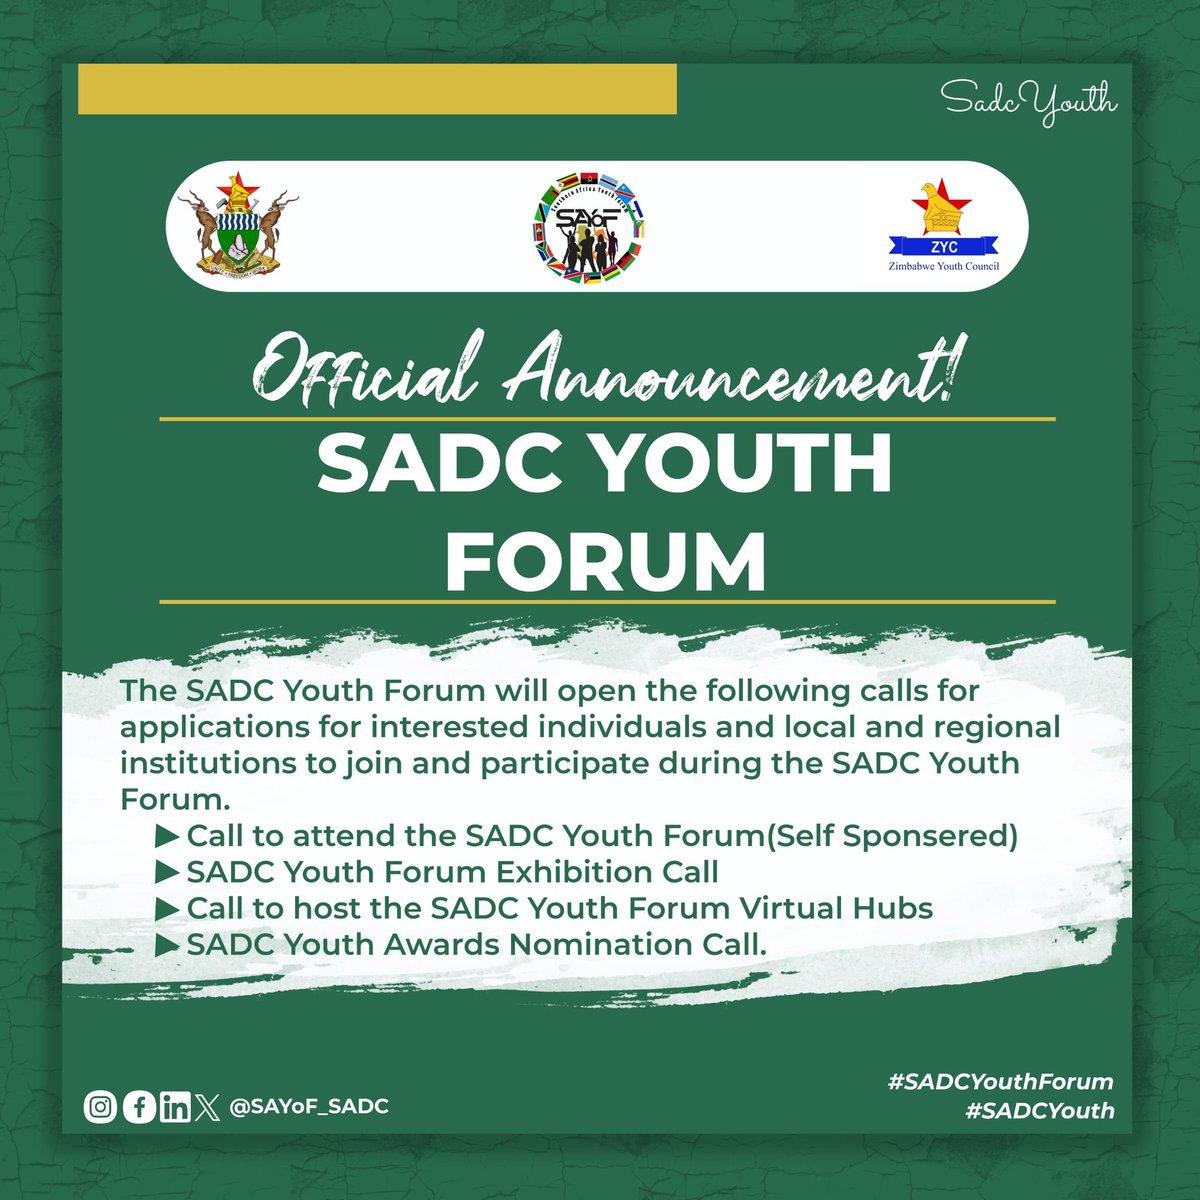 📢📢The SADC Youth Forum will open the following calls for applications: ✅Call to attend the SADC Youth Forum (Self Sponsored) ✅SADC Youth Forum Exhibition Call ✅Call to host the SADC Youth Forum Virtual Hubs ✅SADC Youth Awards Nomination Call #SADCYouth #SADCYouthForum